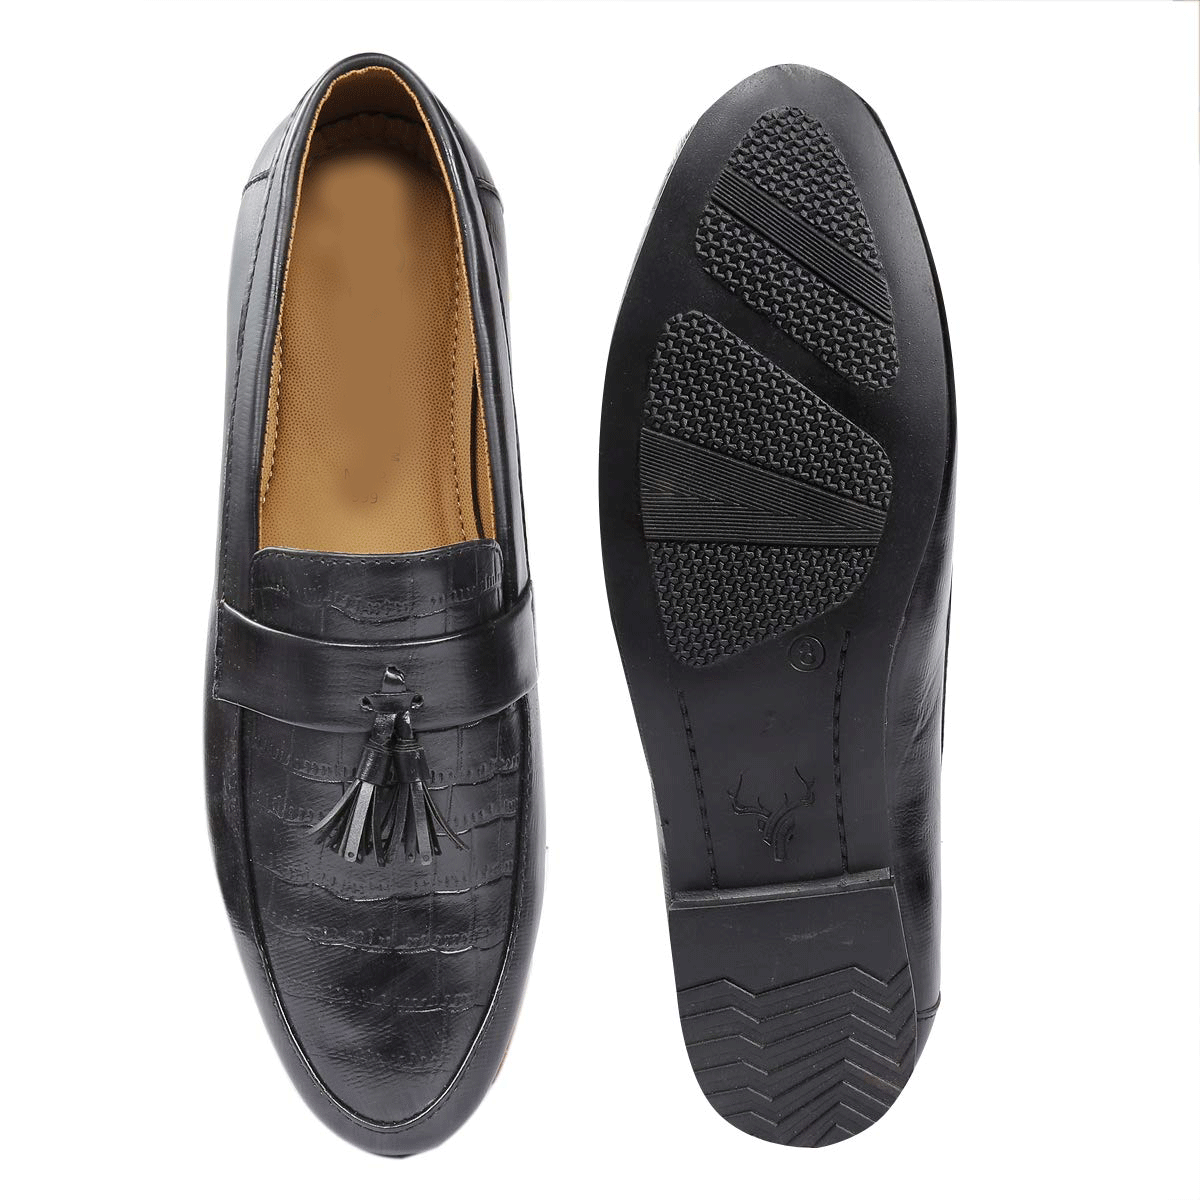 New High Quality Formal For Office And Party Wear Loafer & Moccasins Shoe-Unique and Classy